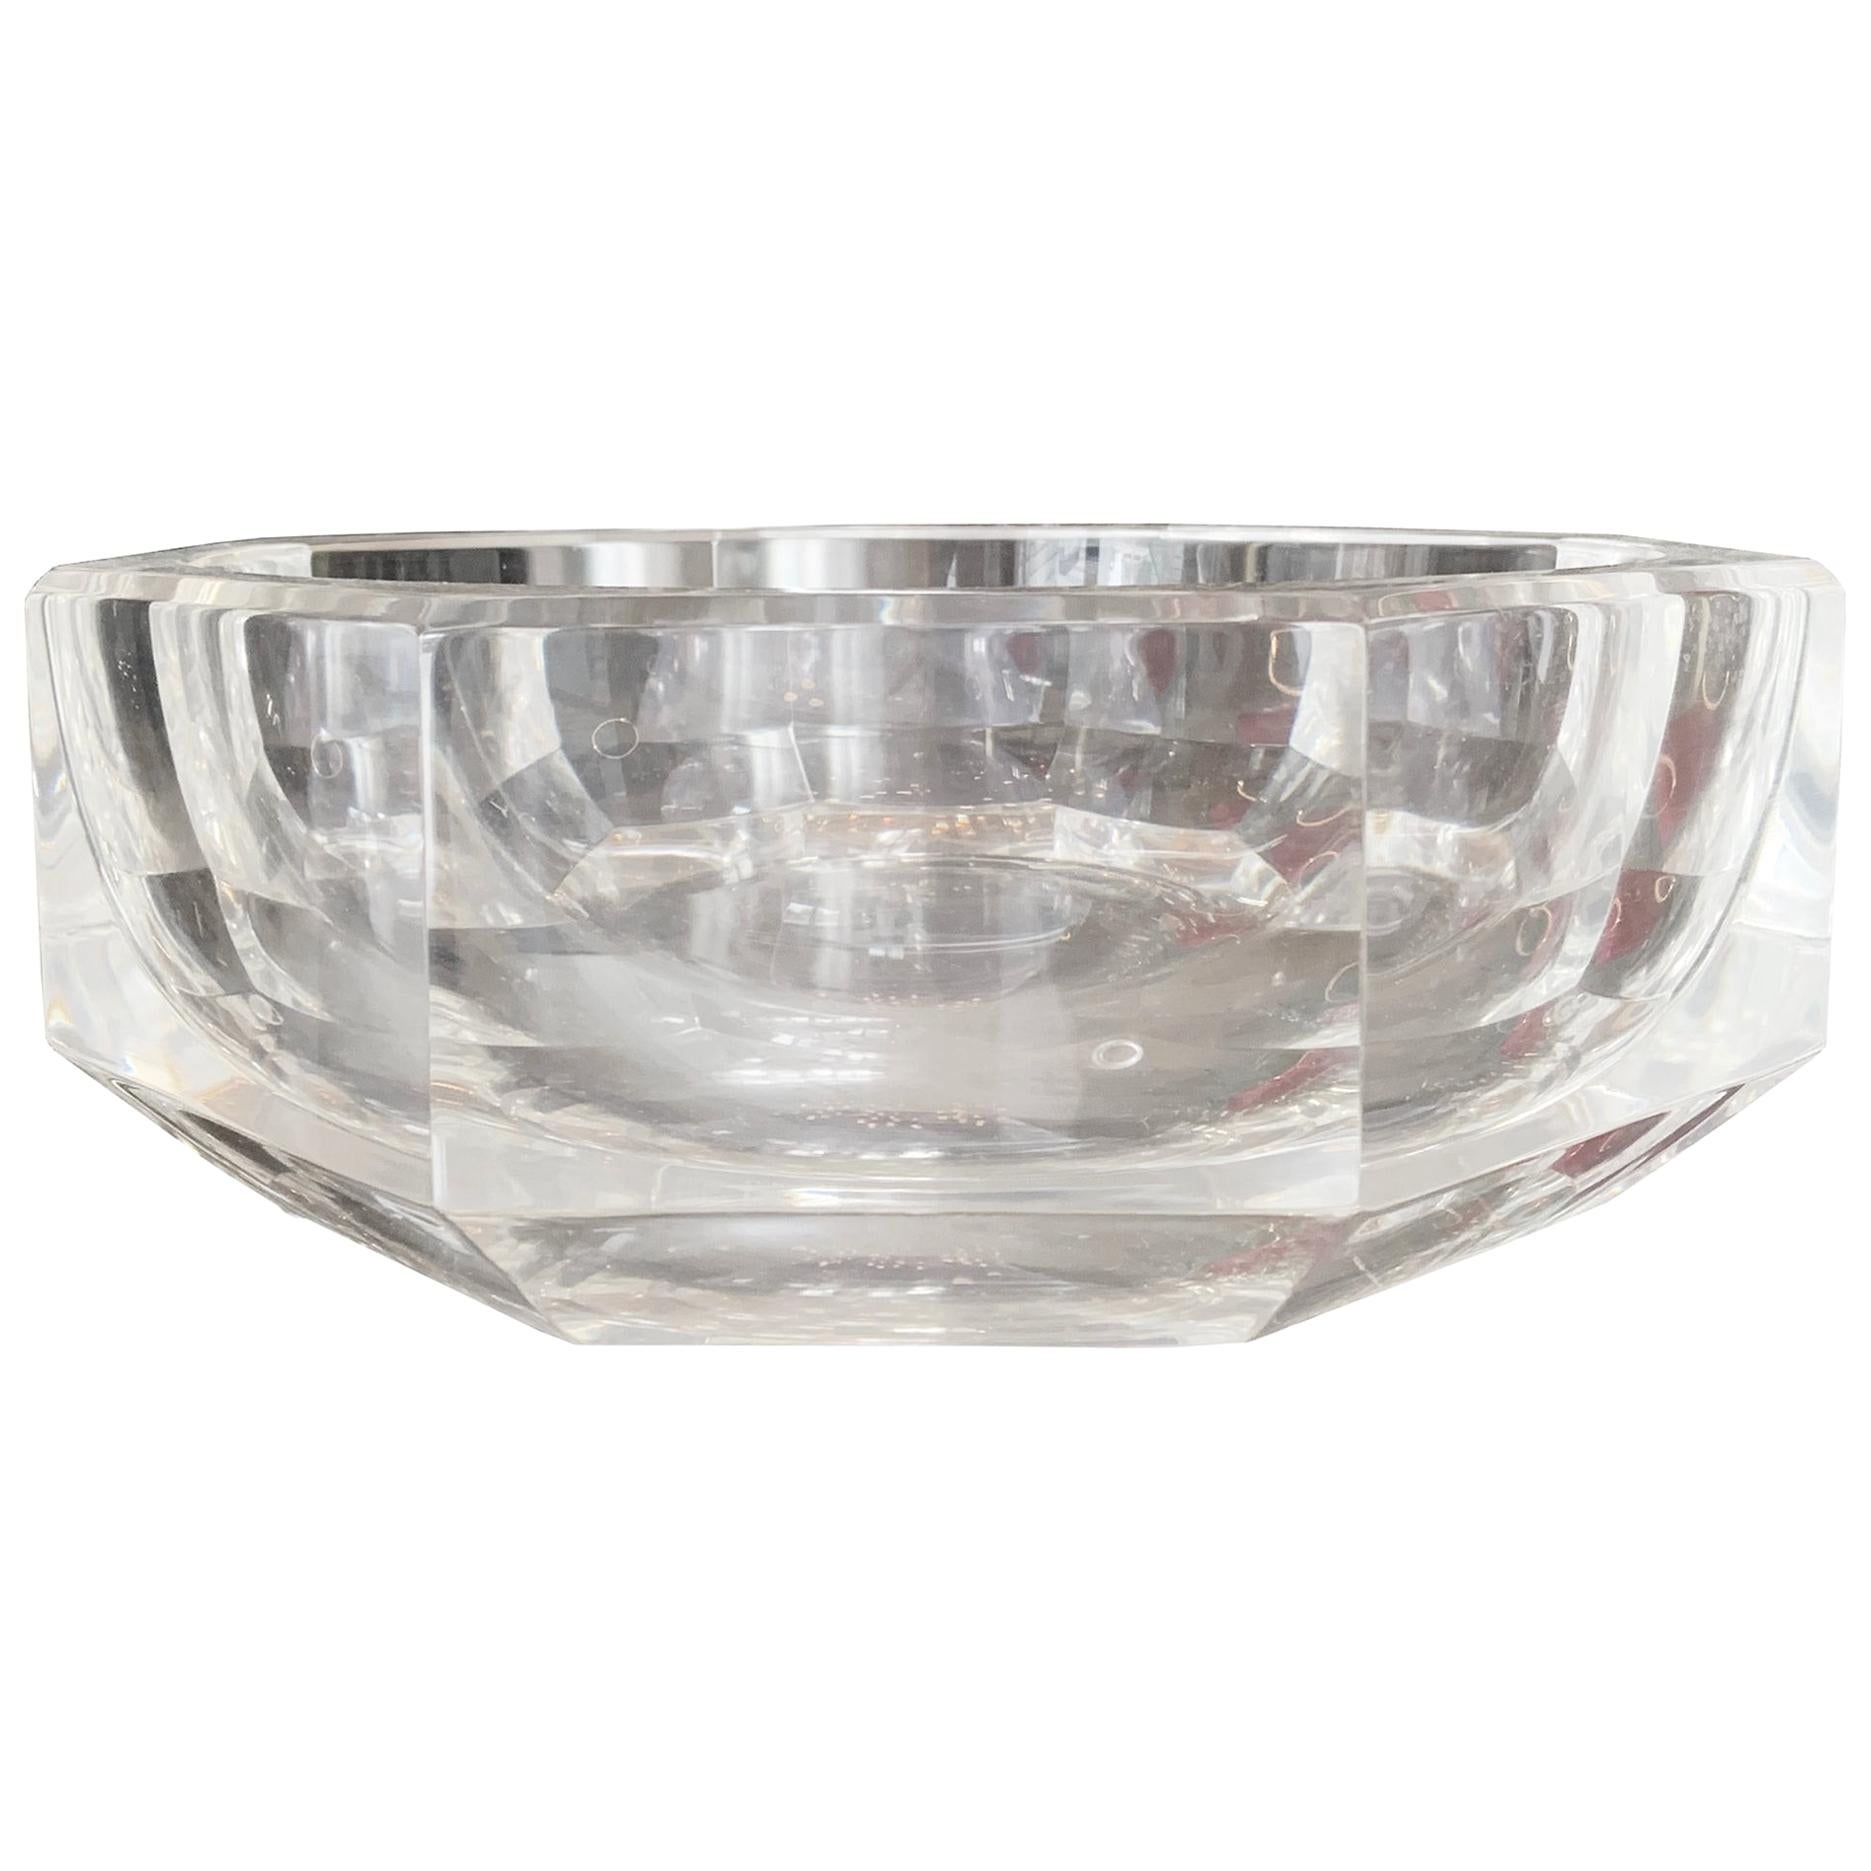 Extra Large Faceted Lucite Bowl, circa 1970s